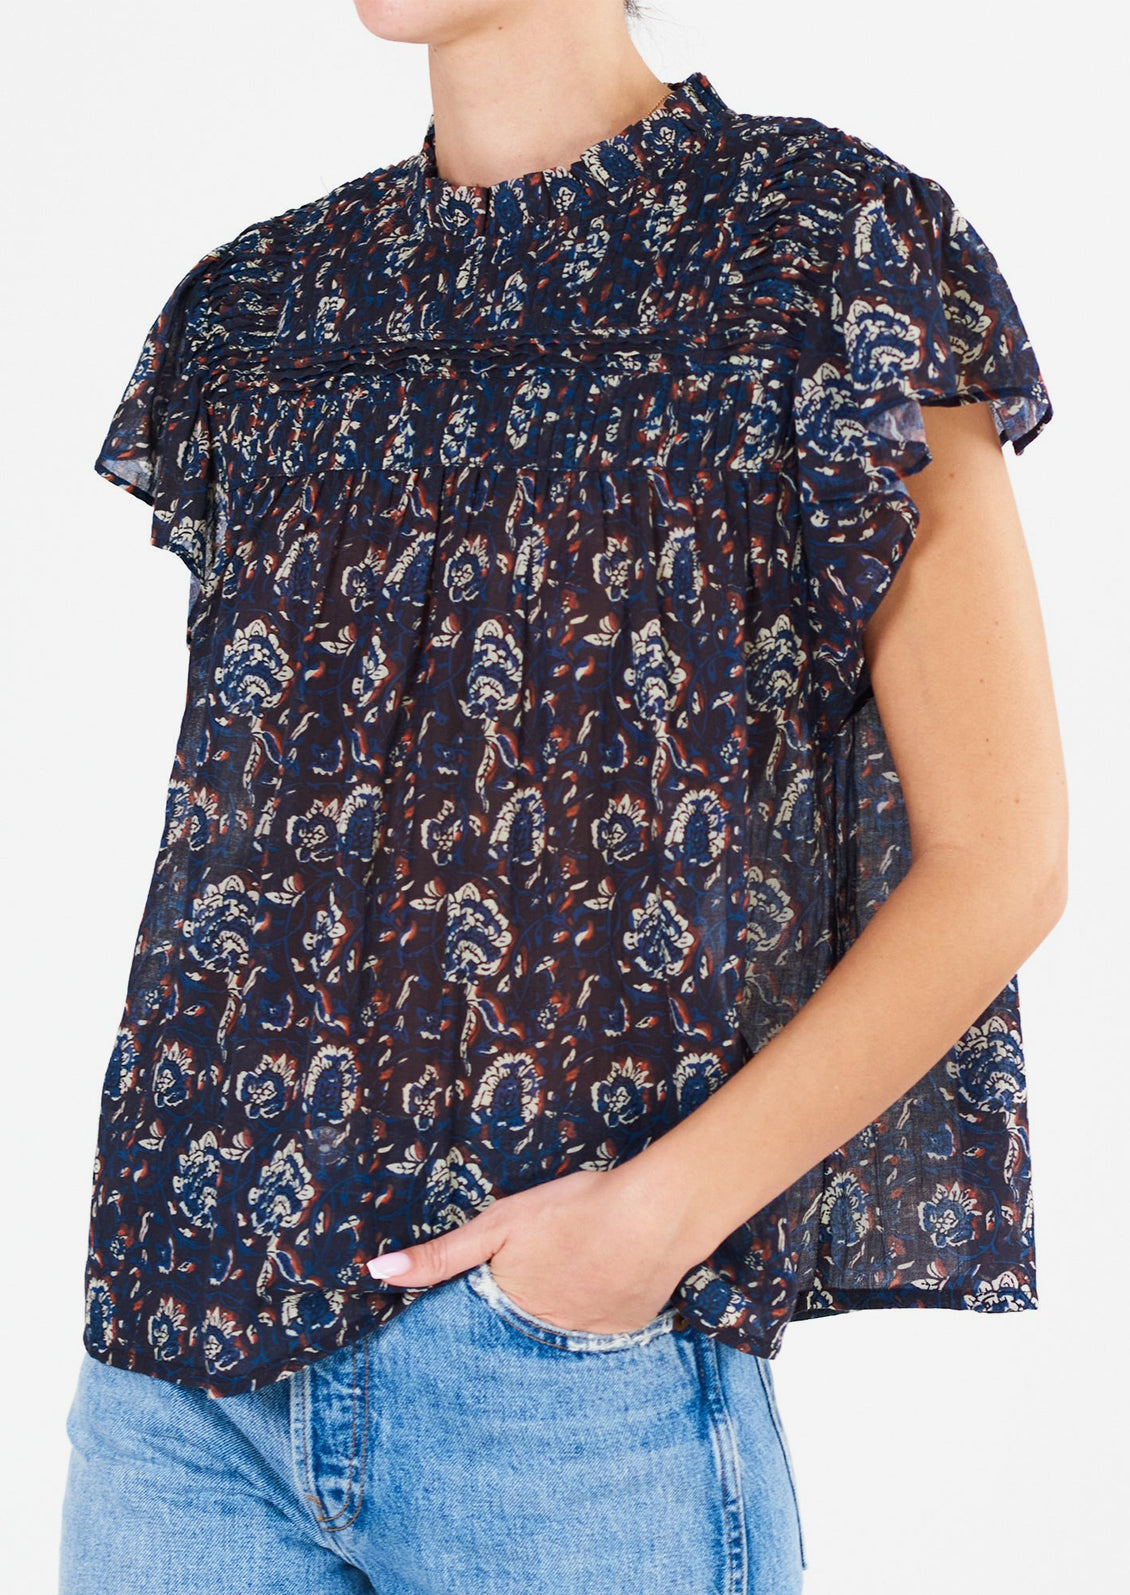 A woman wearing a blue, white and rust floral printed flutter sleeve top.